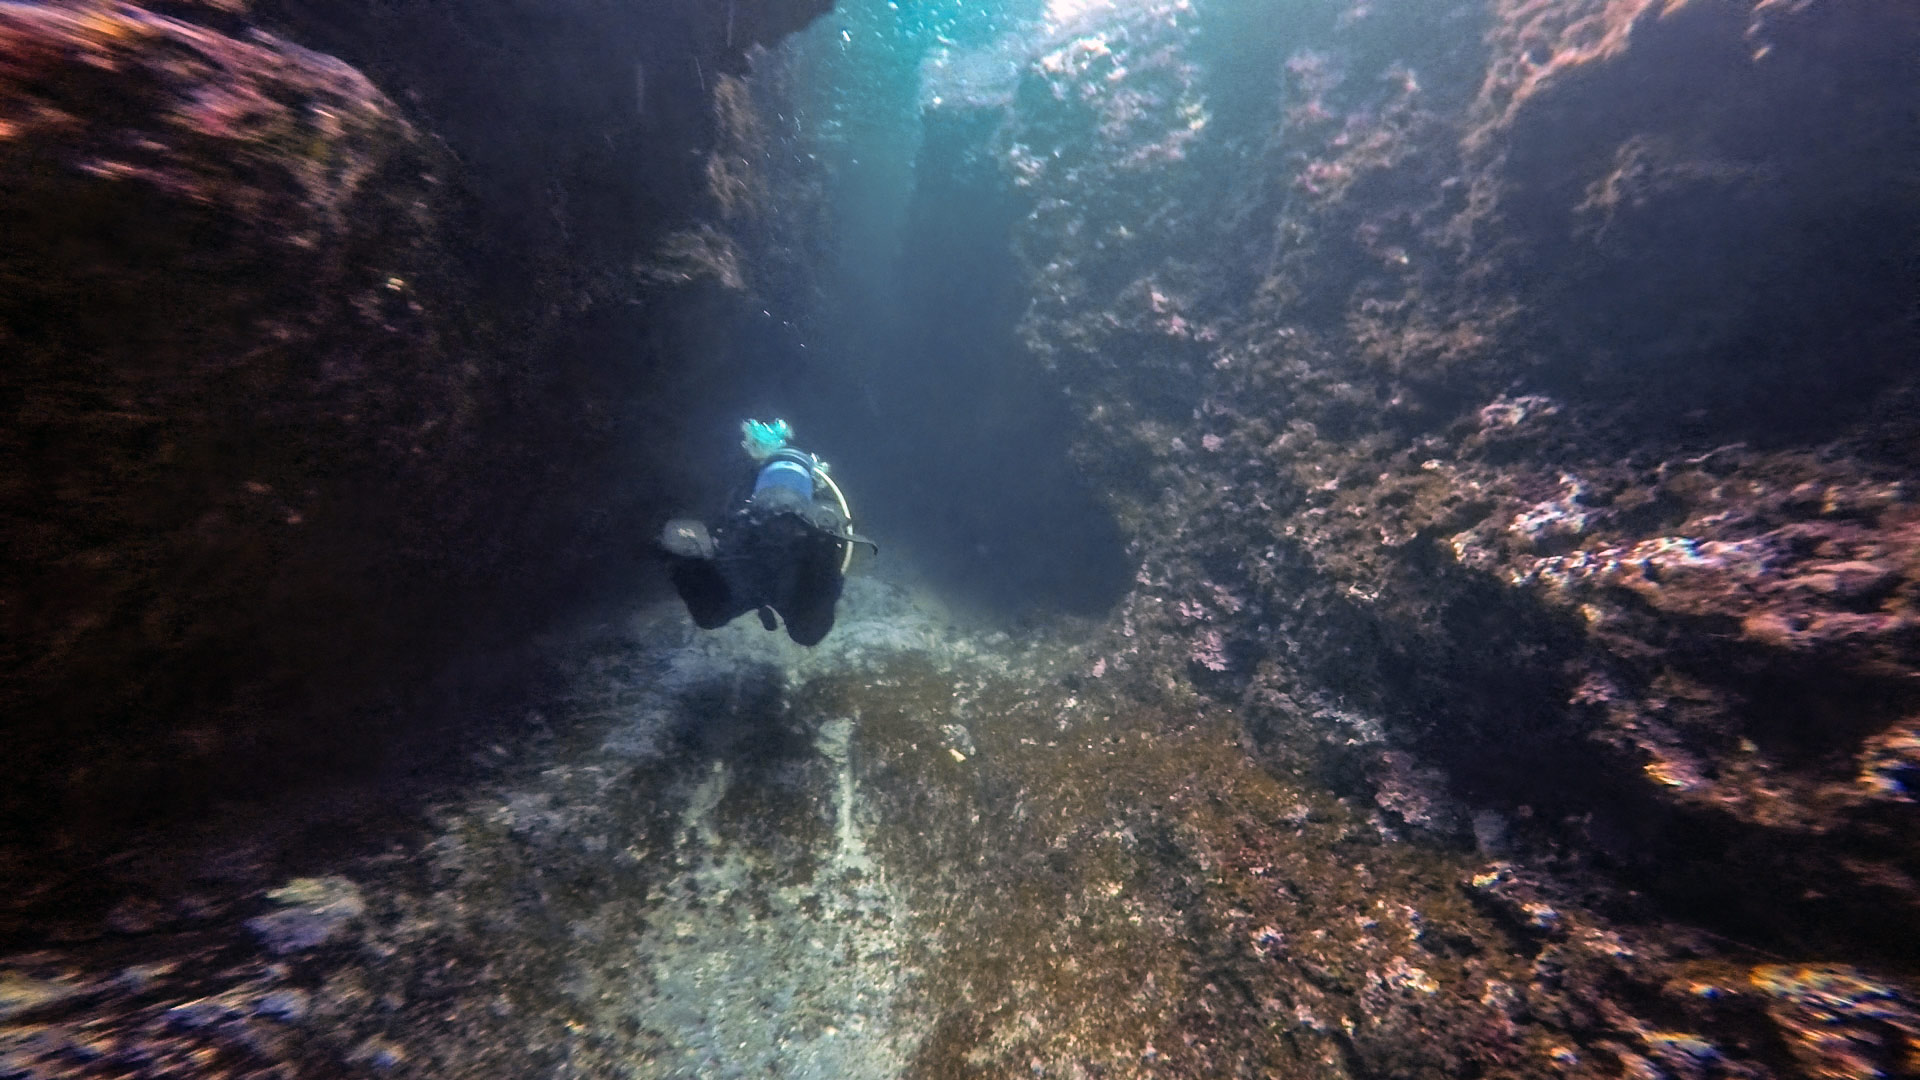 Diver inside the cave at L'Ahrax Point